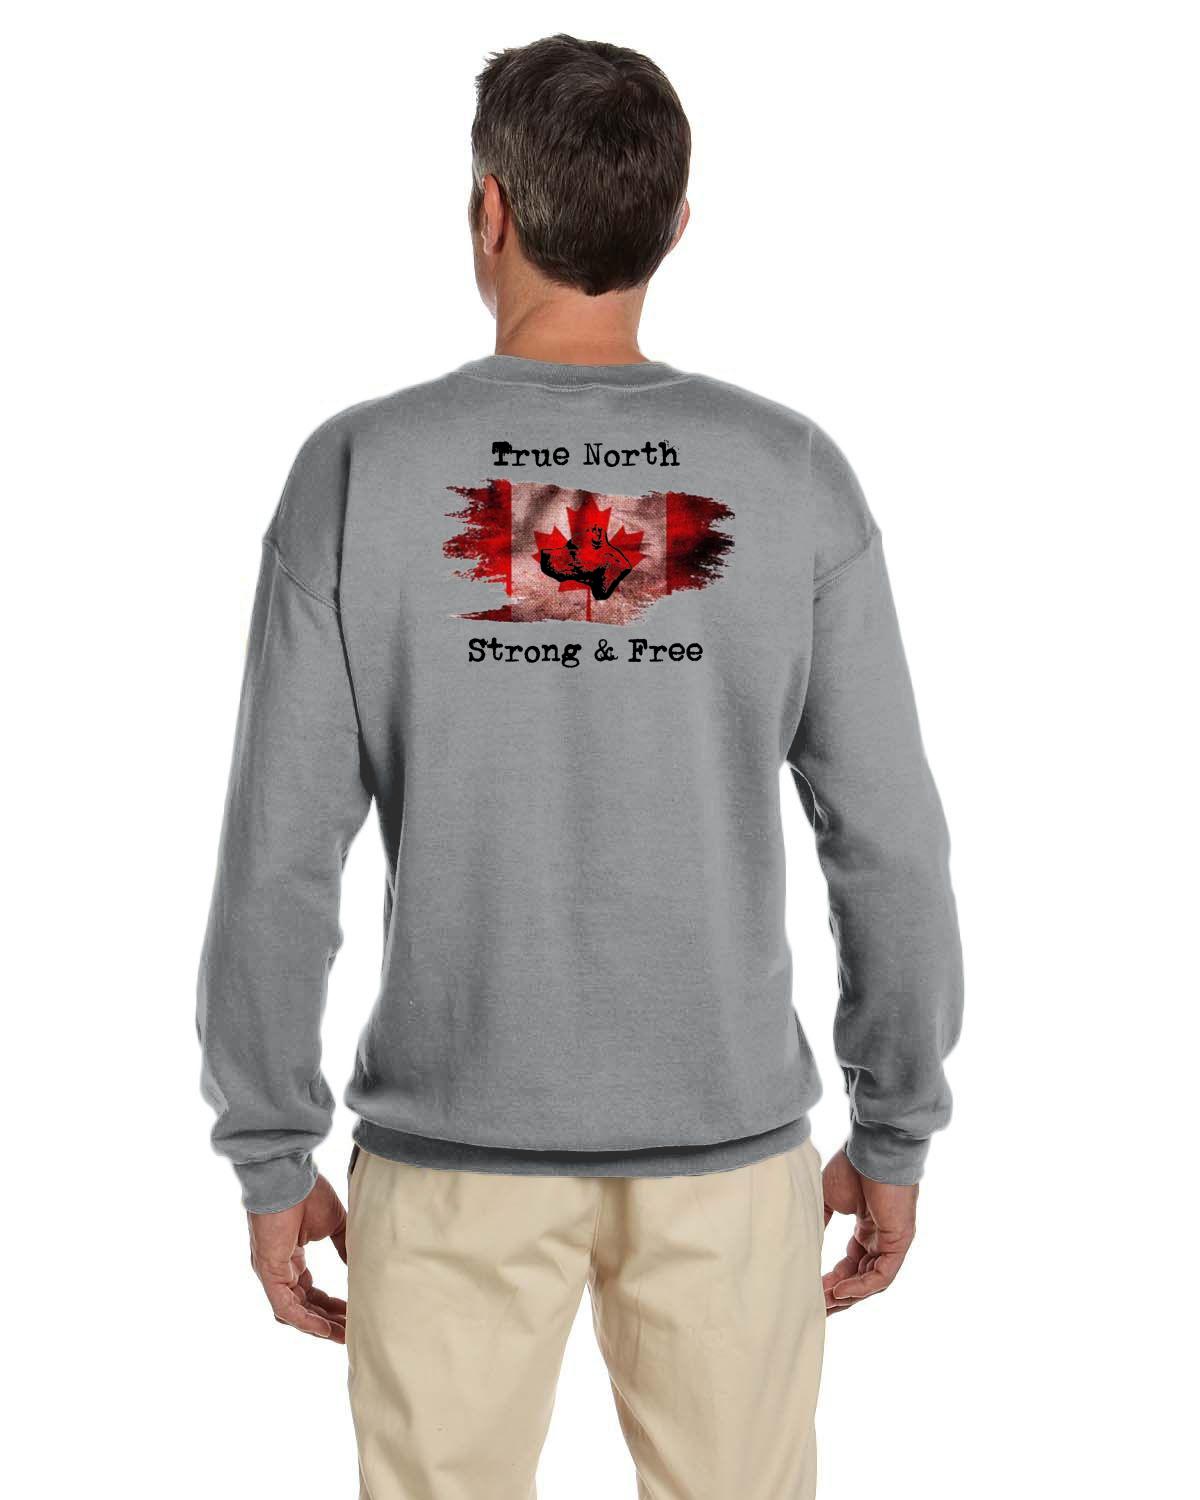 CDAC "True North Strong & Free" Adult Crewneck Sweater White / Grey